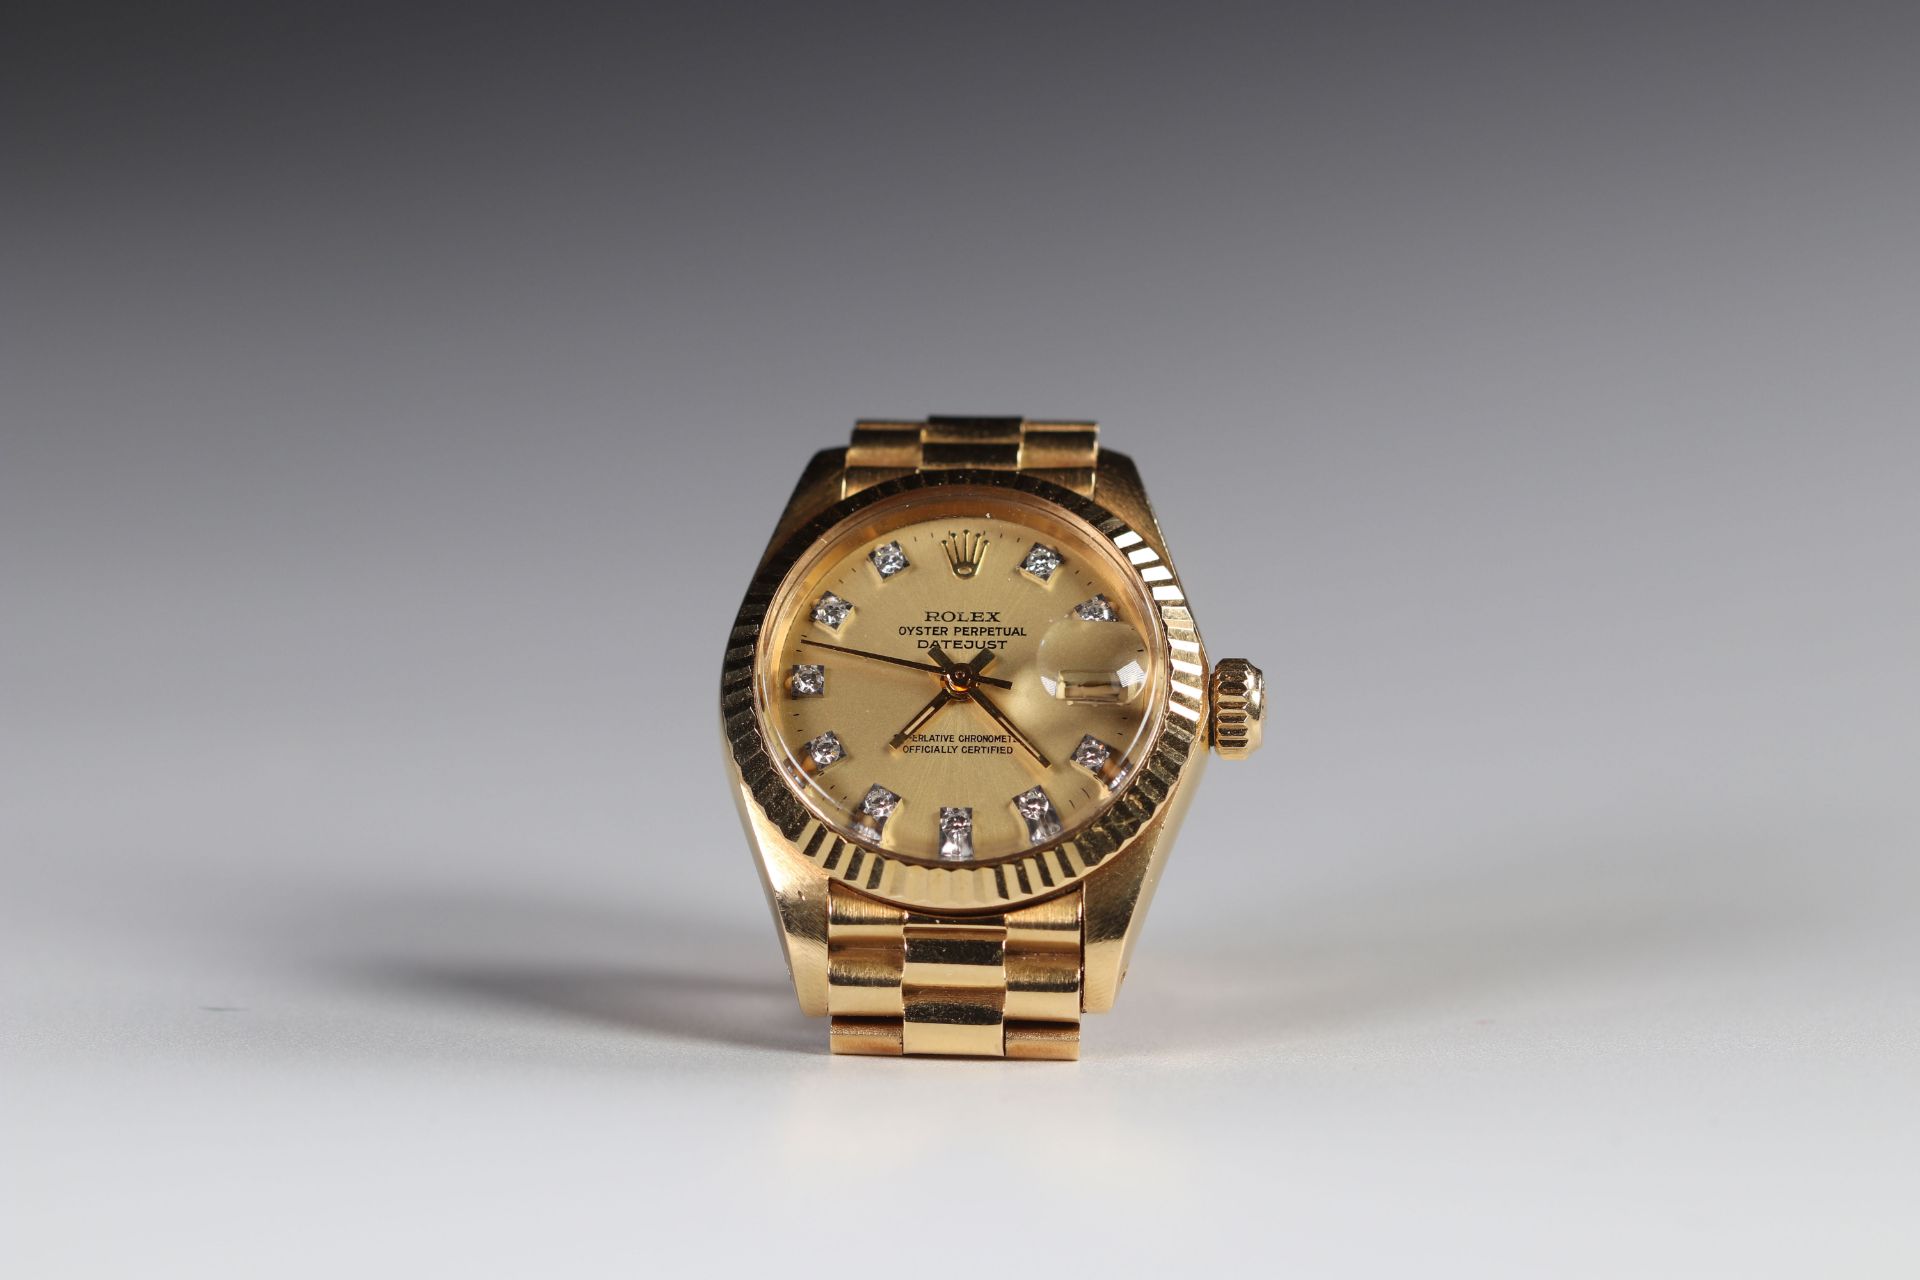 ROLEX LADY DATEJUST Rolex Oyster Perpetual Lady Datejust wristwatch, in yellow gold, Helvetia head h